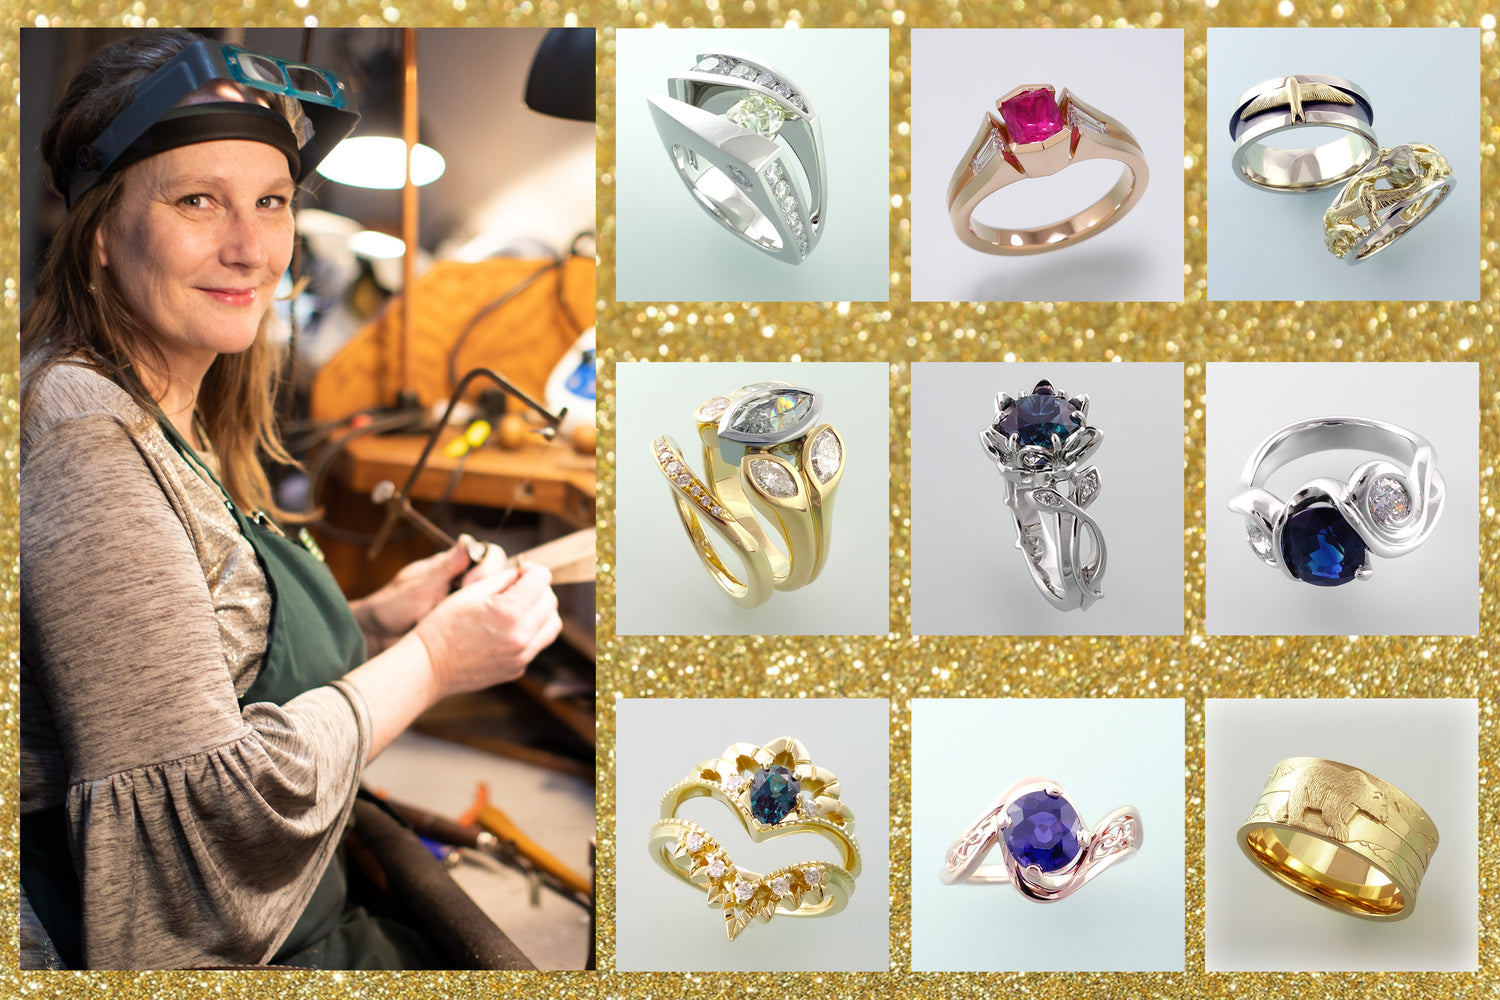 A Goldsmith, Mary Elizabeth, sits at a jewelers workbench smiling, and to her right are 9 images of unique rings and wedding sets that are custom made and one of a kind jewelry created for her clients.  There are diamonds, rubies, and sapphires in gold.